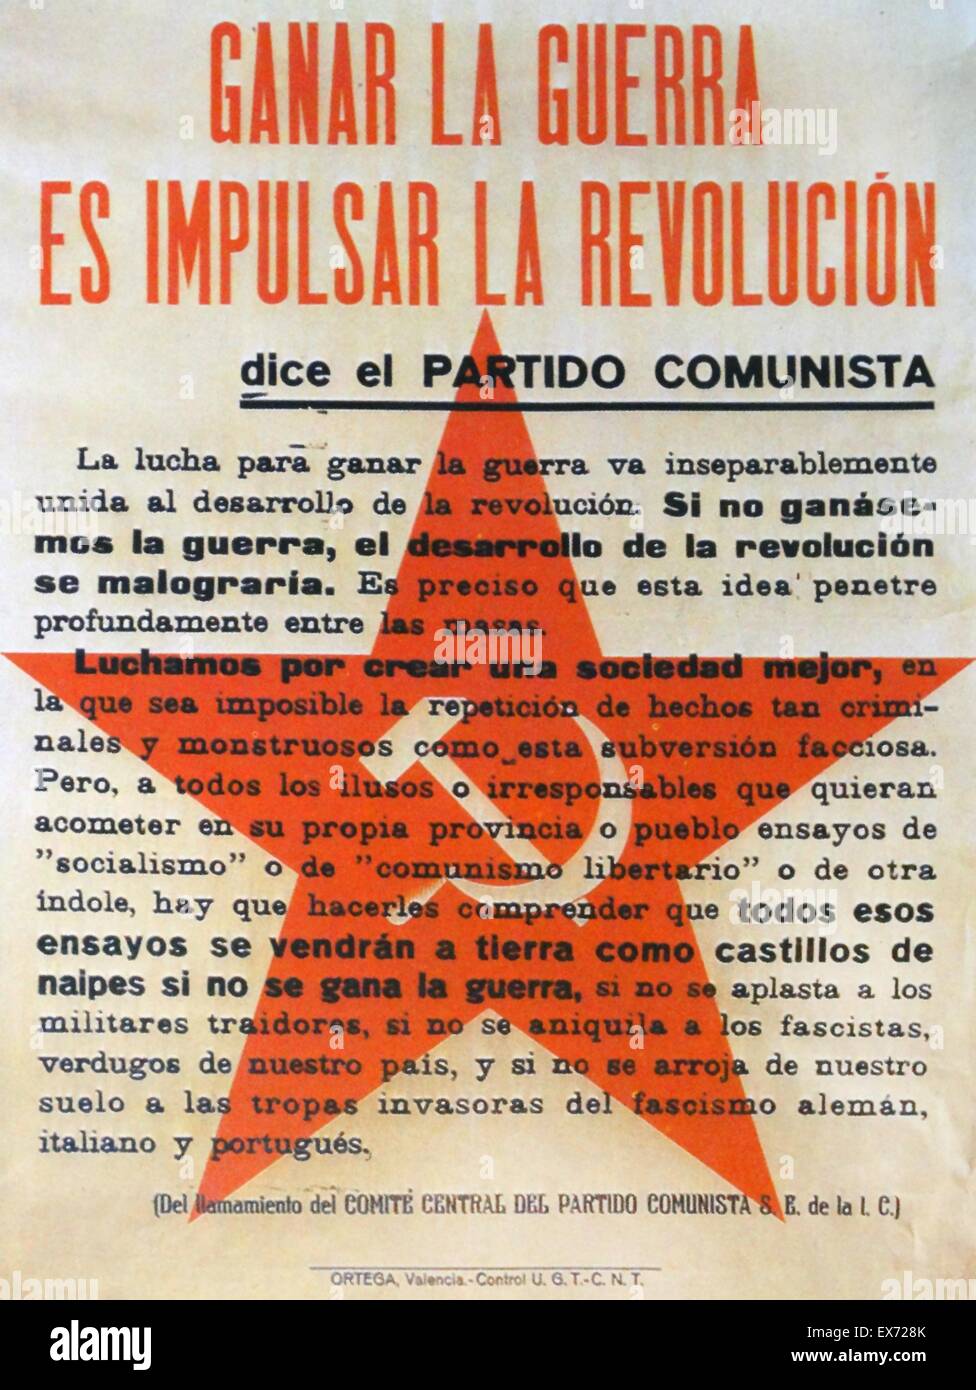 Ganar la Guerra es impulsar la Revolución dice el Partido Comunista (We will not win the war without a well ordered Republic, says the Communist Party). Poster stating the incontrovertible reasons for communists to fight during the Spanish Civil War Stock Photo